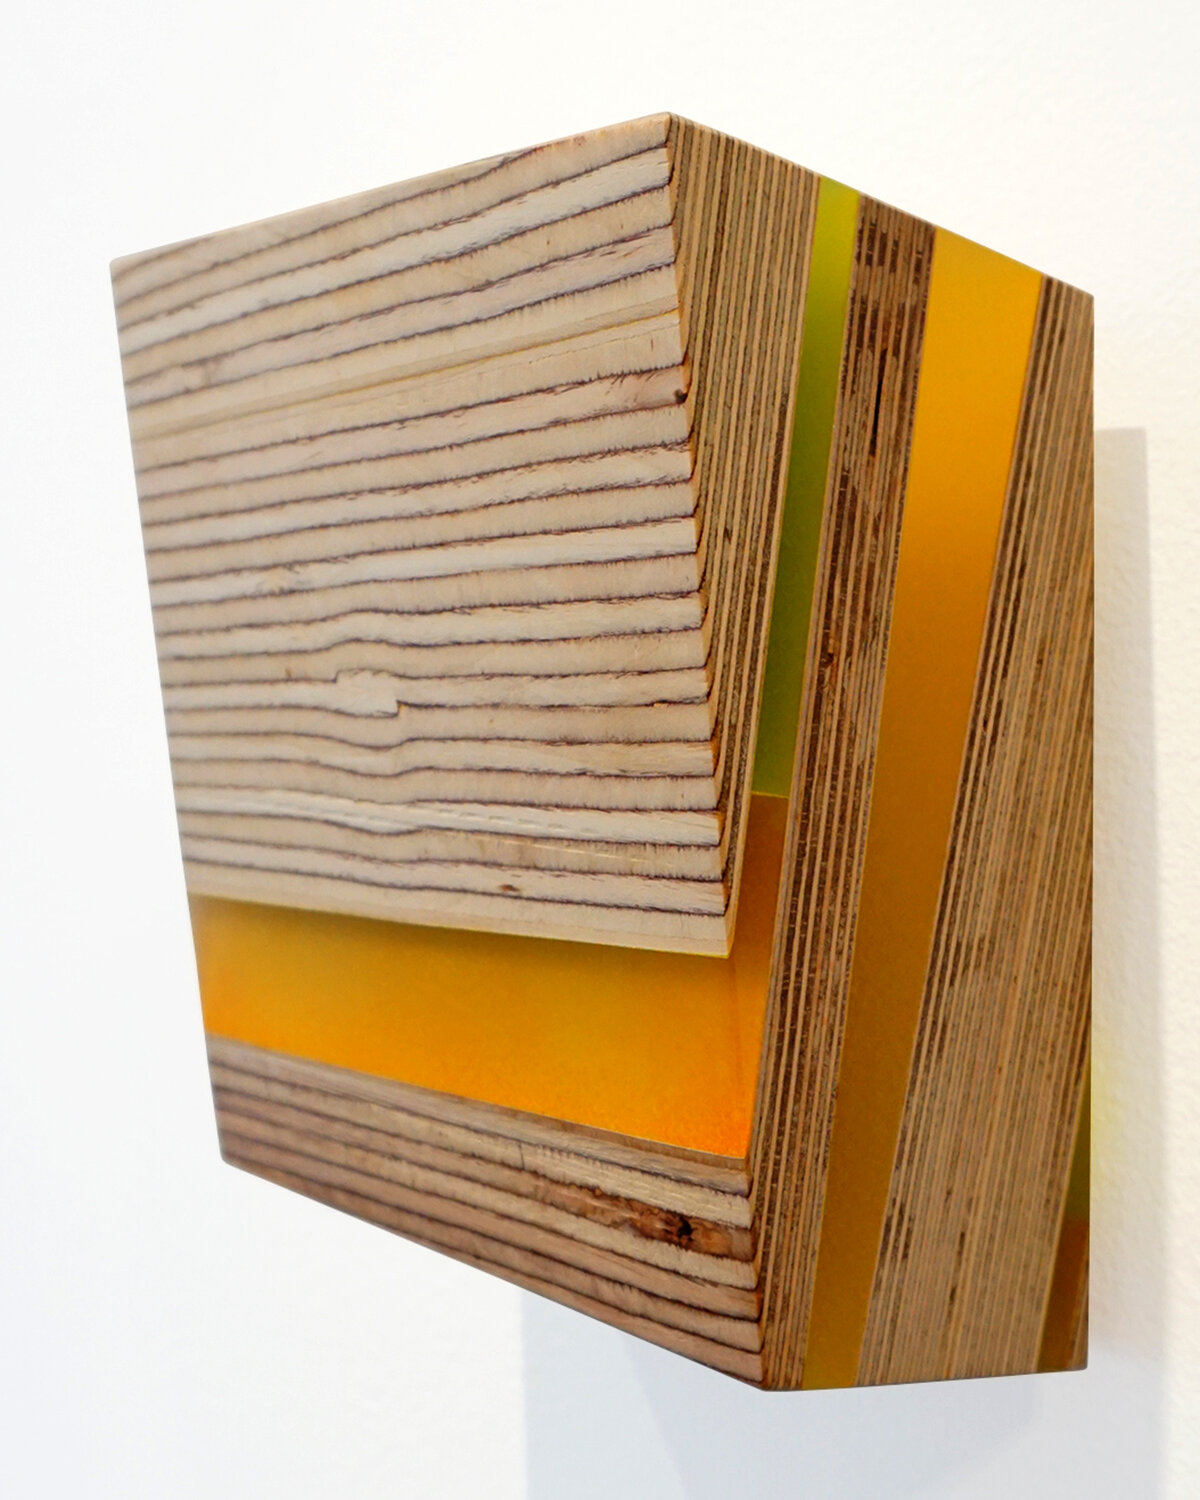 Pyrite Paisley Series: Golden (side view), 9.5 x 7 x 4 inches / 24.1 x 17.8 x 10.2 cm, mixed media on various plywoods and Lucite, 2019